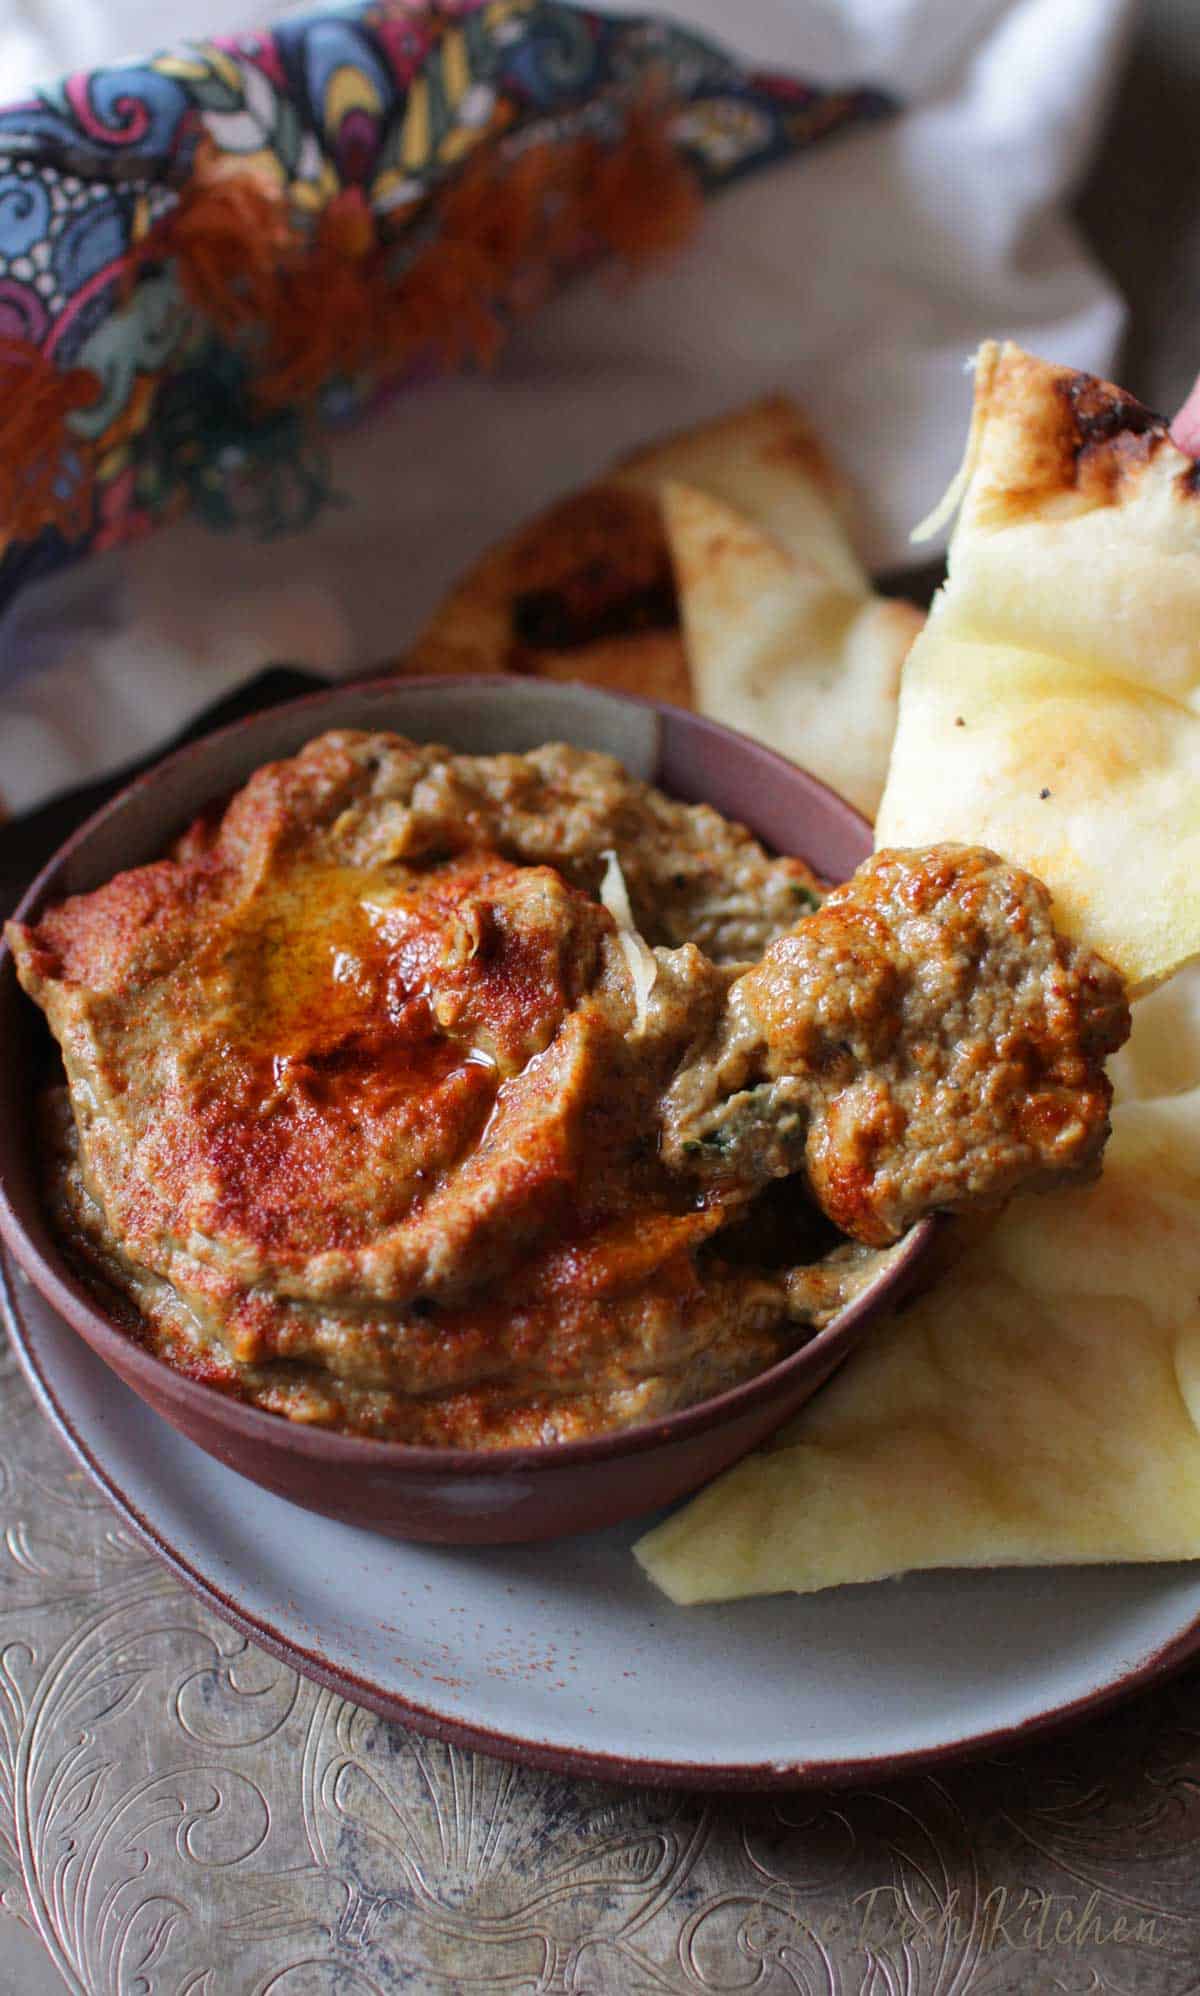 A slice of pita bread being dipped in a bowl of baba ganoush